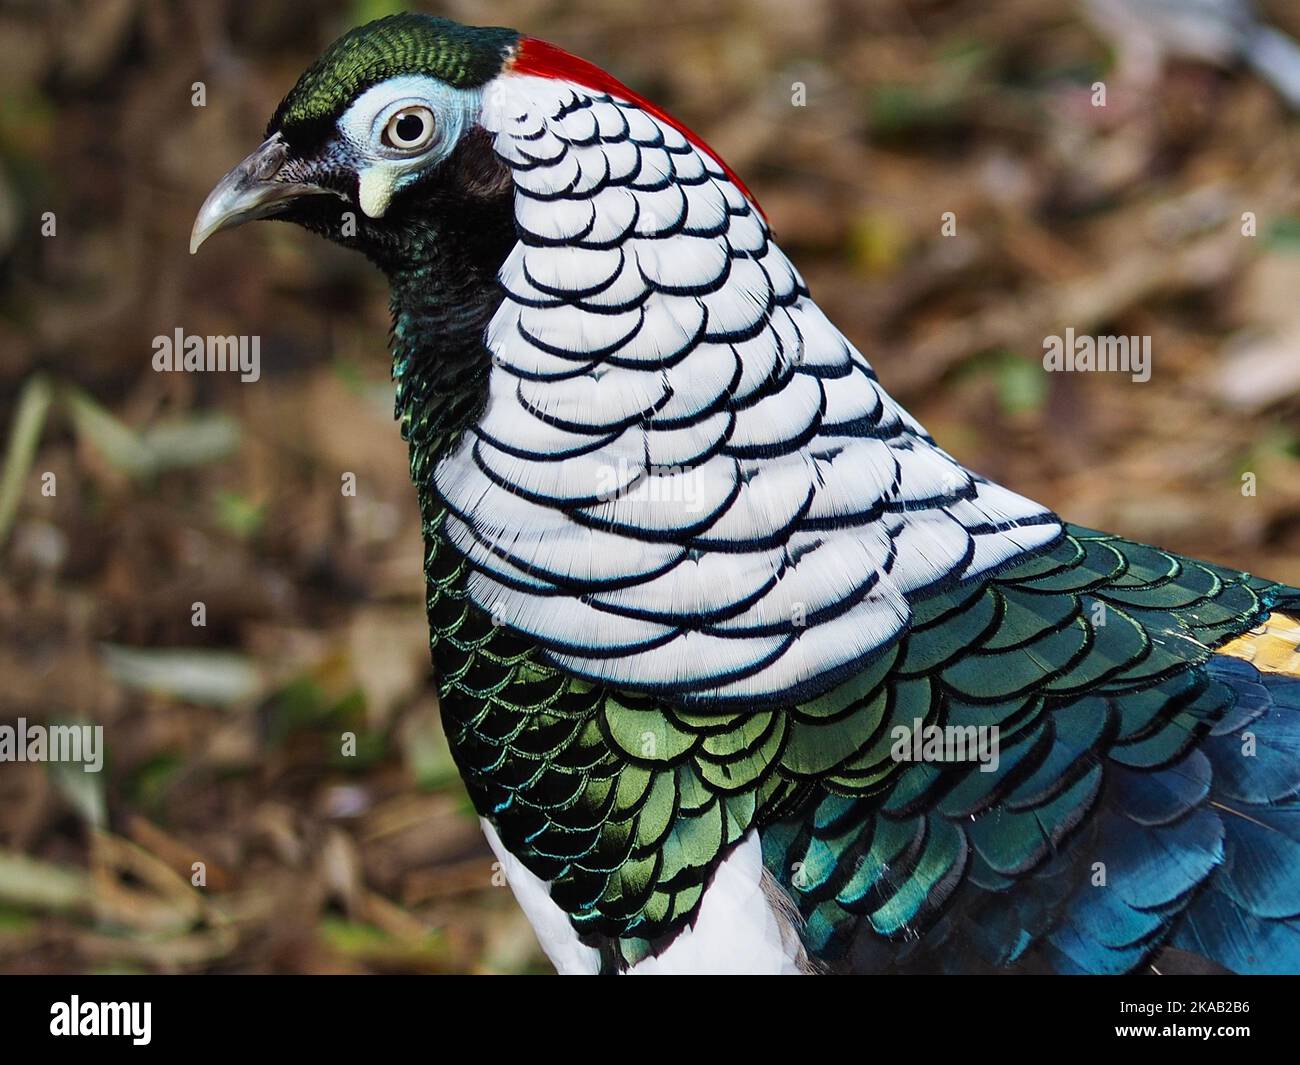 Arresting elegant male Lady Amherst's Pheasant with magnificent glamorous plumage. Stock Photo